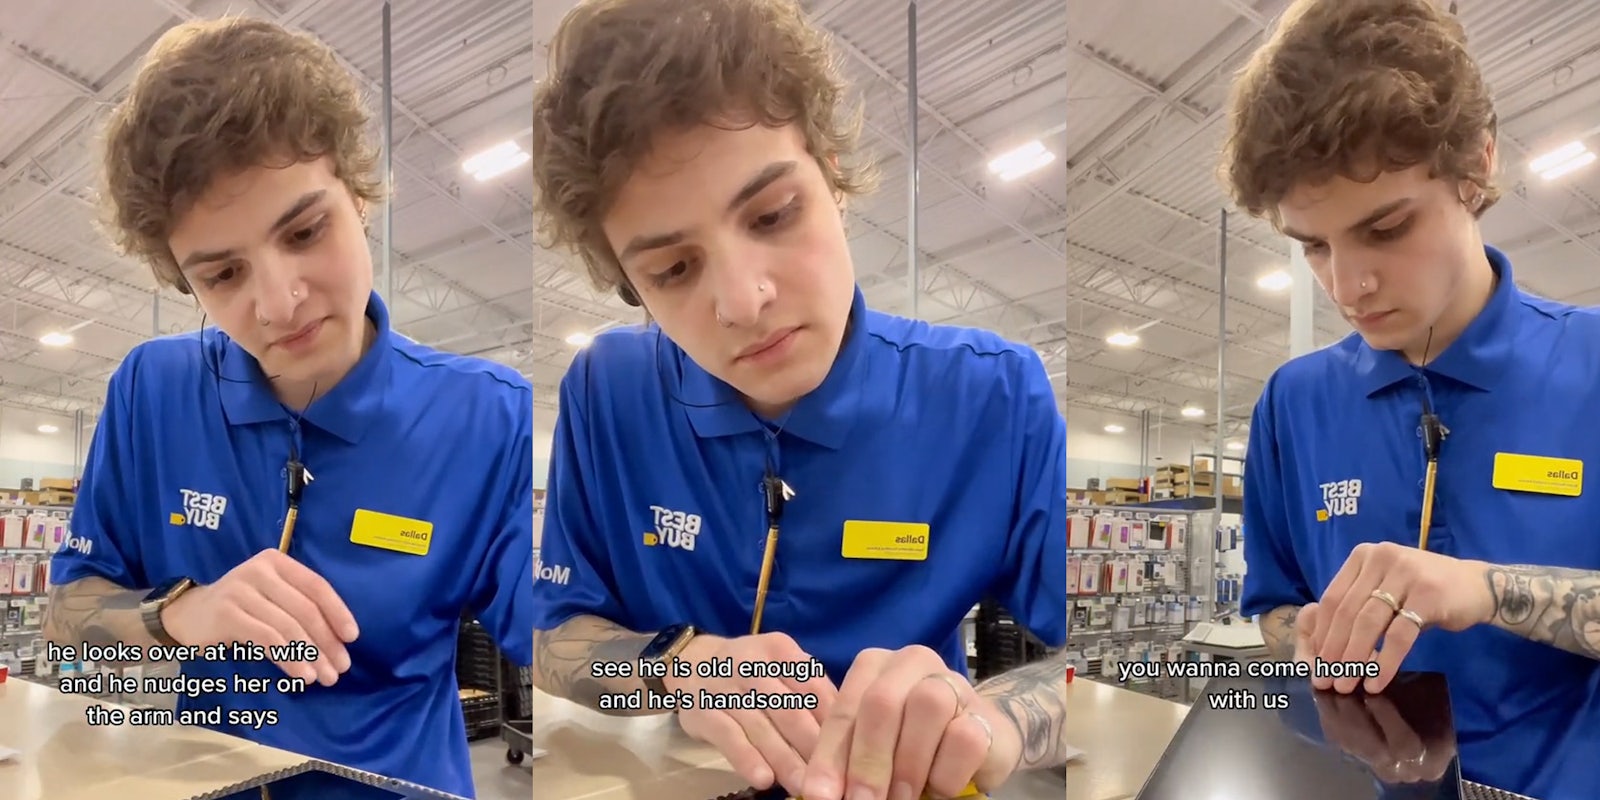 Best Buy worker with caption 'he looks over at his wife and he nudges her arm and says' (l) Best Buy worker with caption 'see he is old enough and he's handsome' (c) Best Buy worker with caption 'you wanna come home with us' (r)